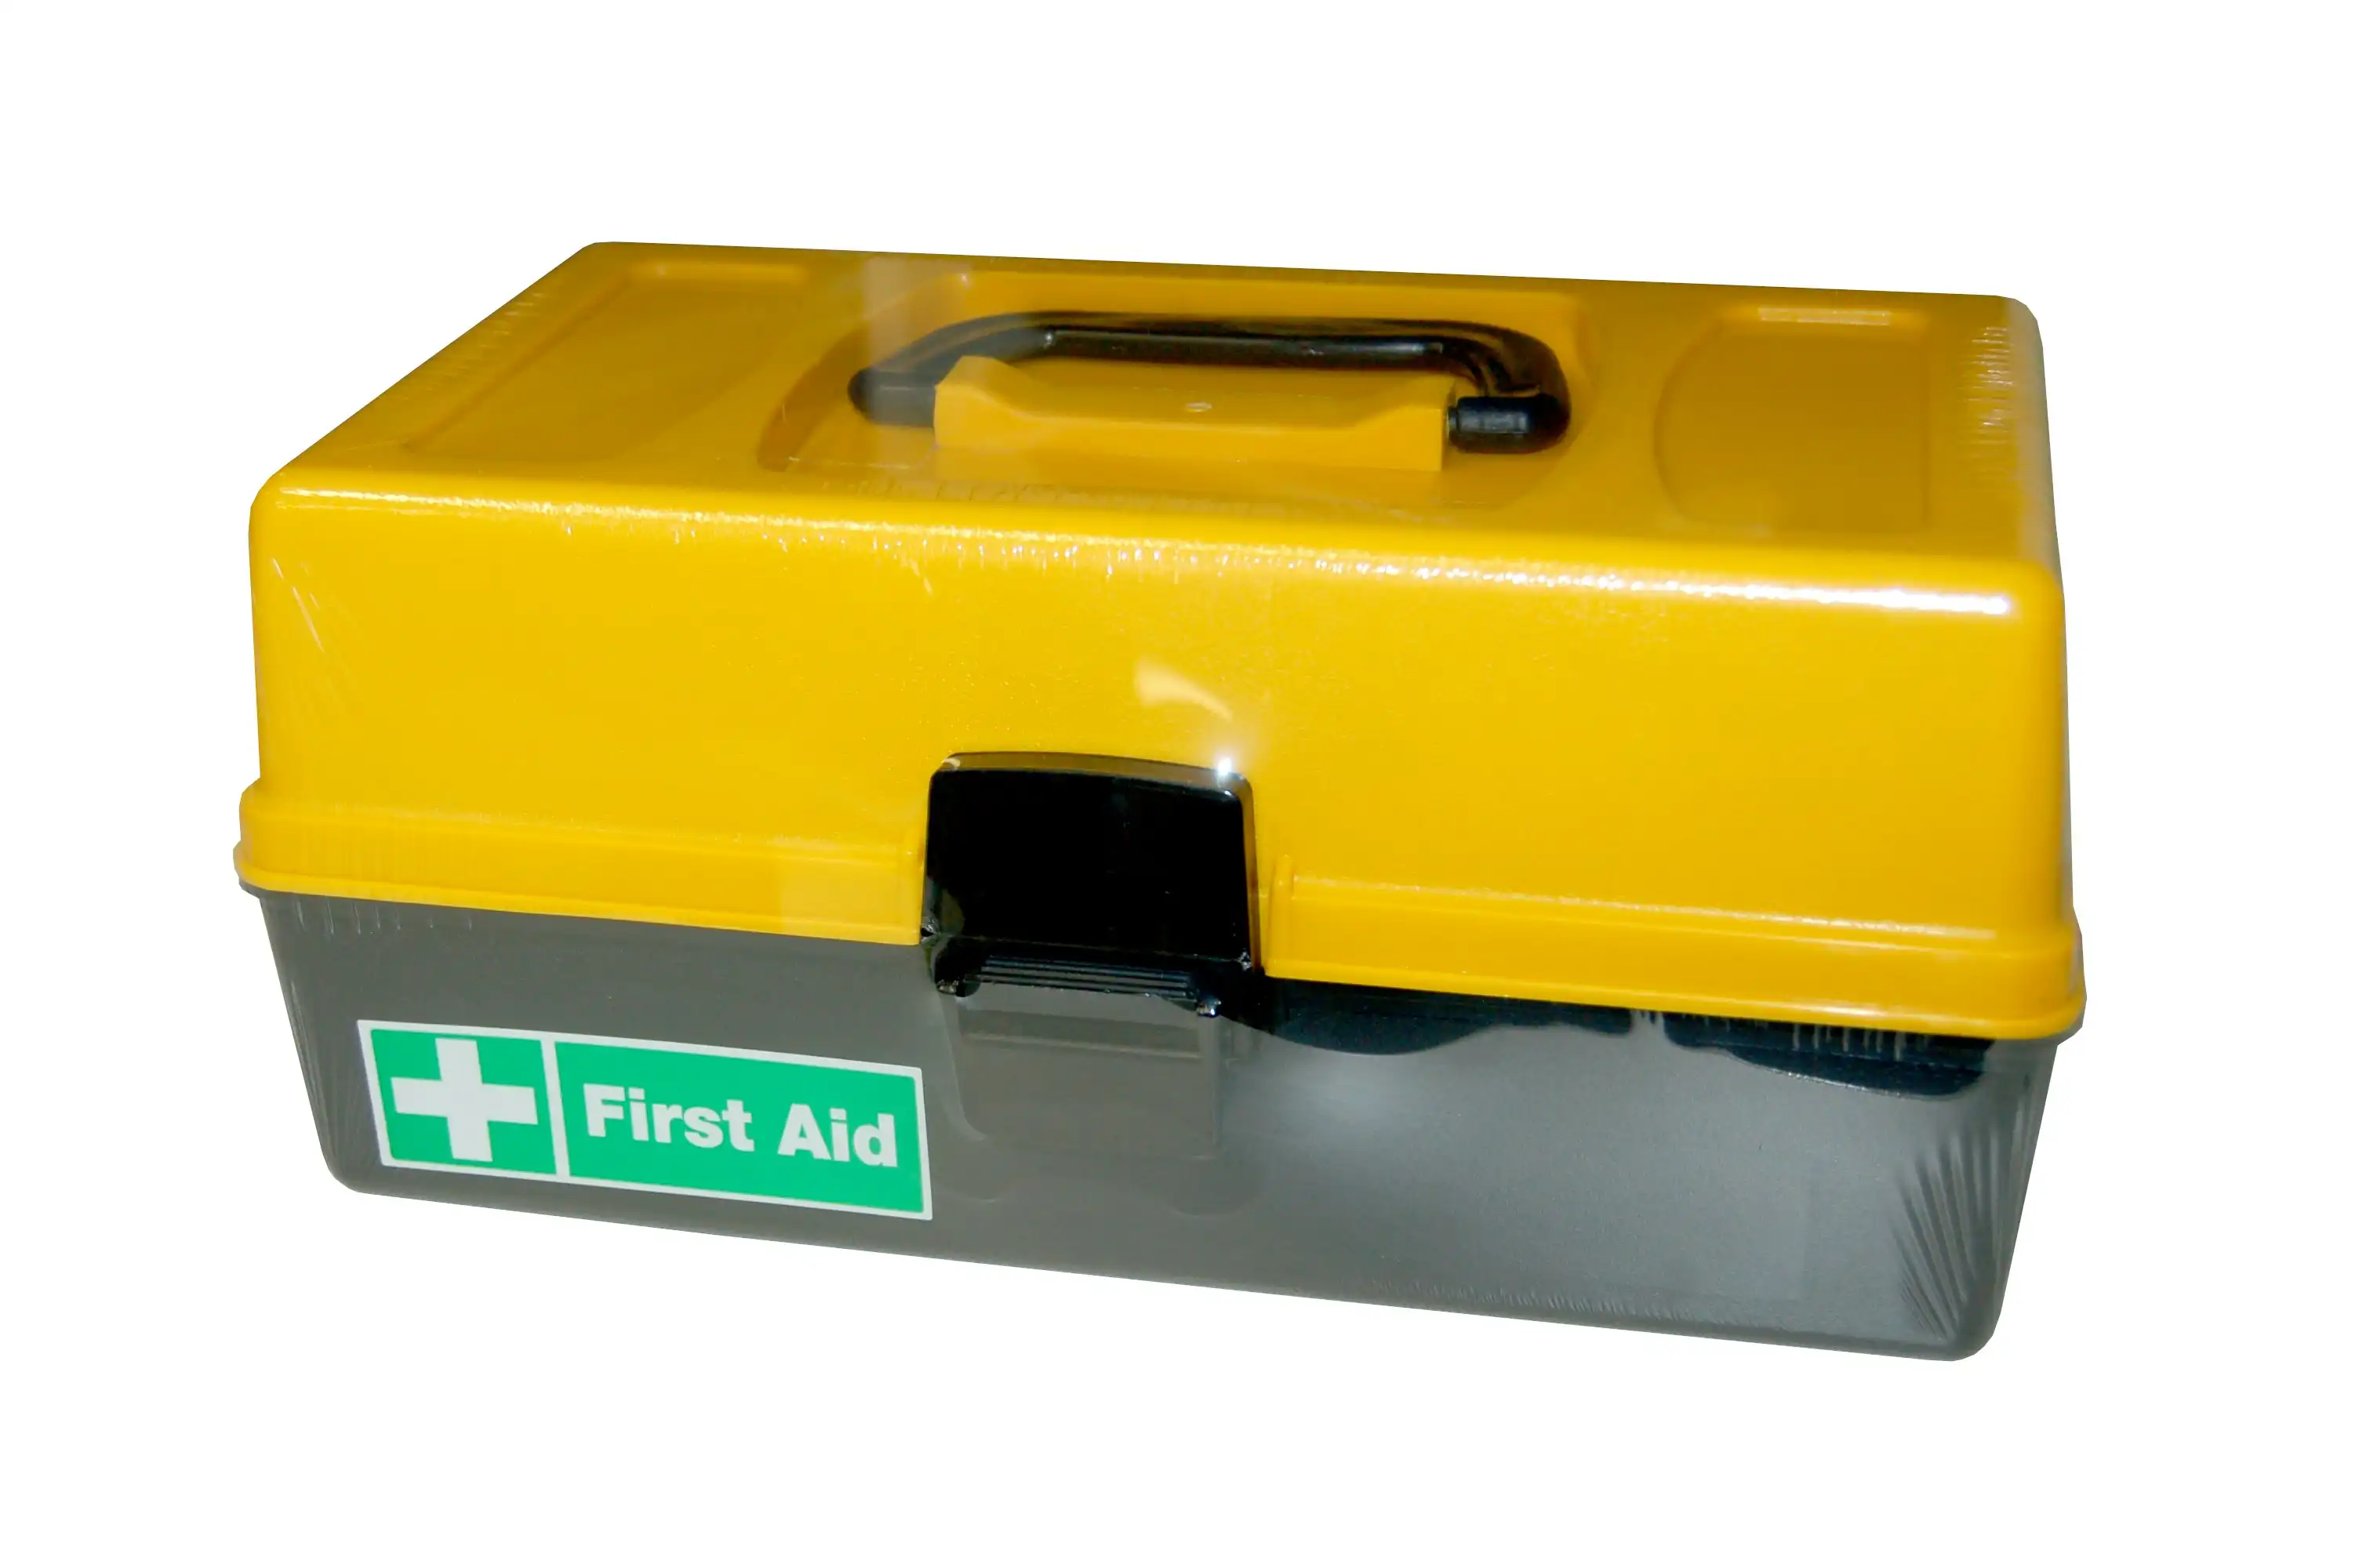 Livingstone First Aid Empty Polypropylene Case 30 x 18.5 x 14 cm Yellow Lid and Black Base with Compartments